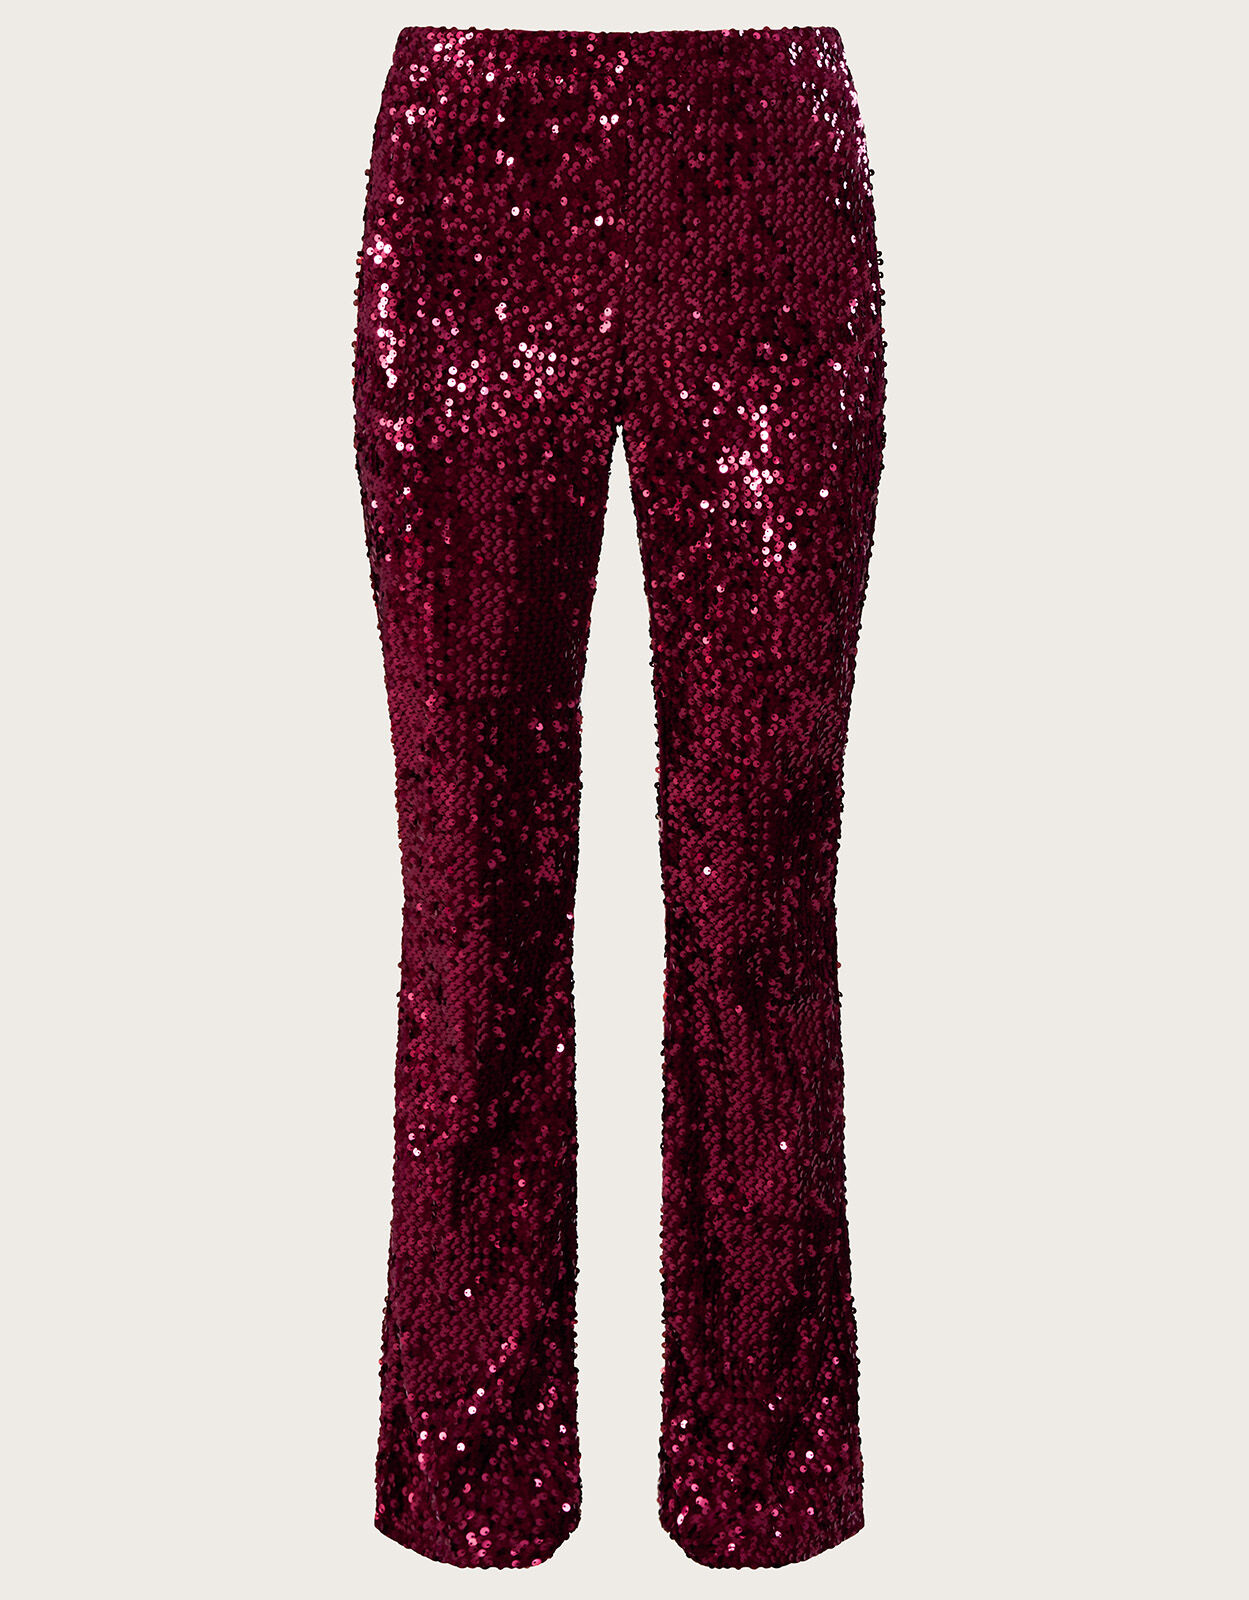 Womens Sequined Flare Pants, Sparkling Burgundy Glitter Wide Leg Trousers  for Party and Nightclub 2024 from gaoshangs, $70.08 | DHgate Mobile